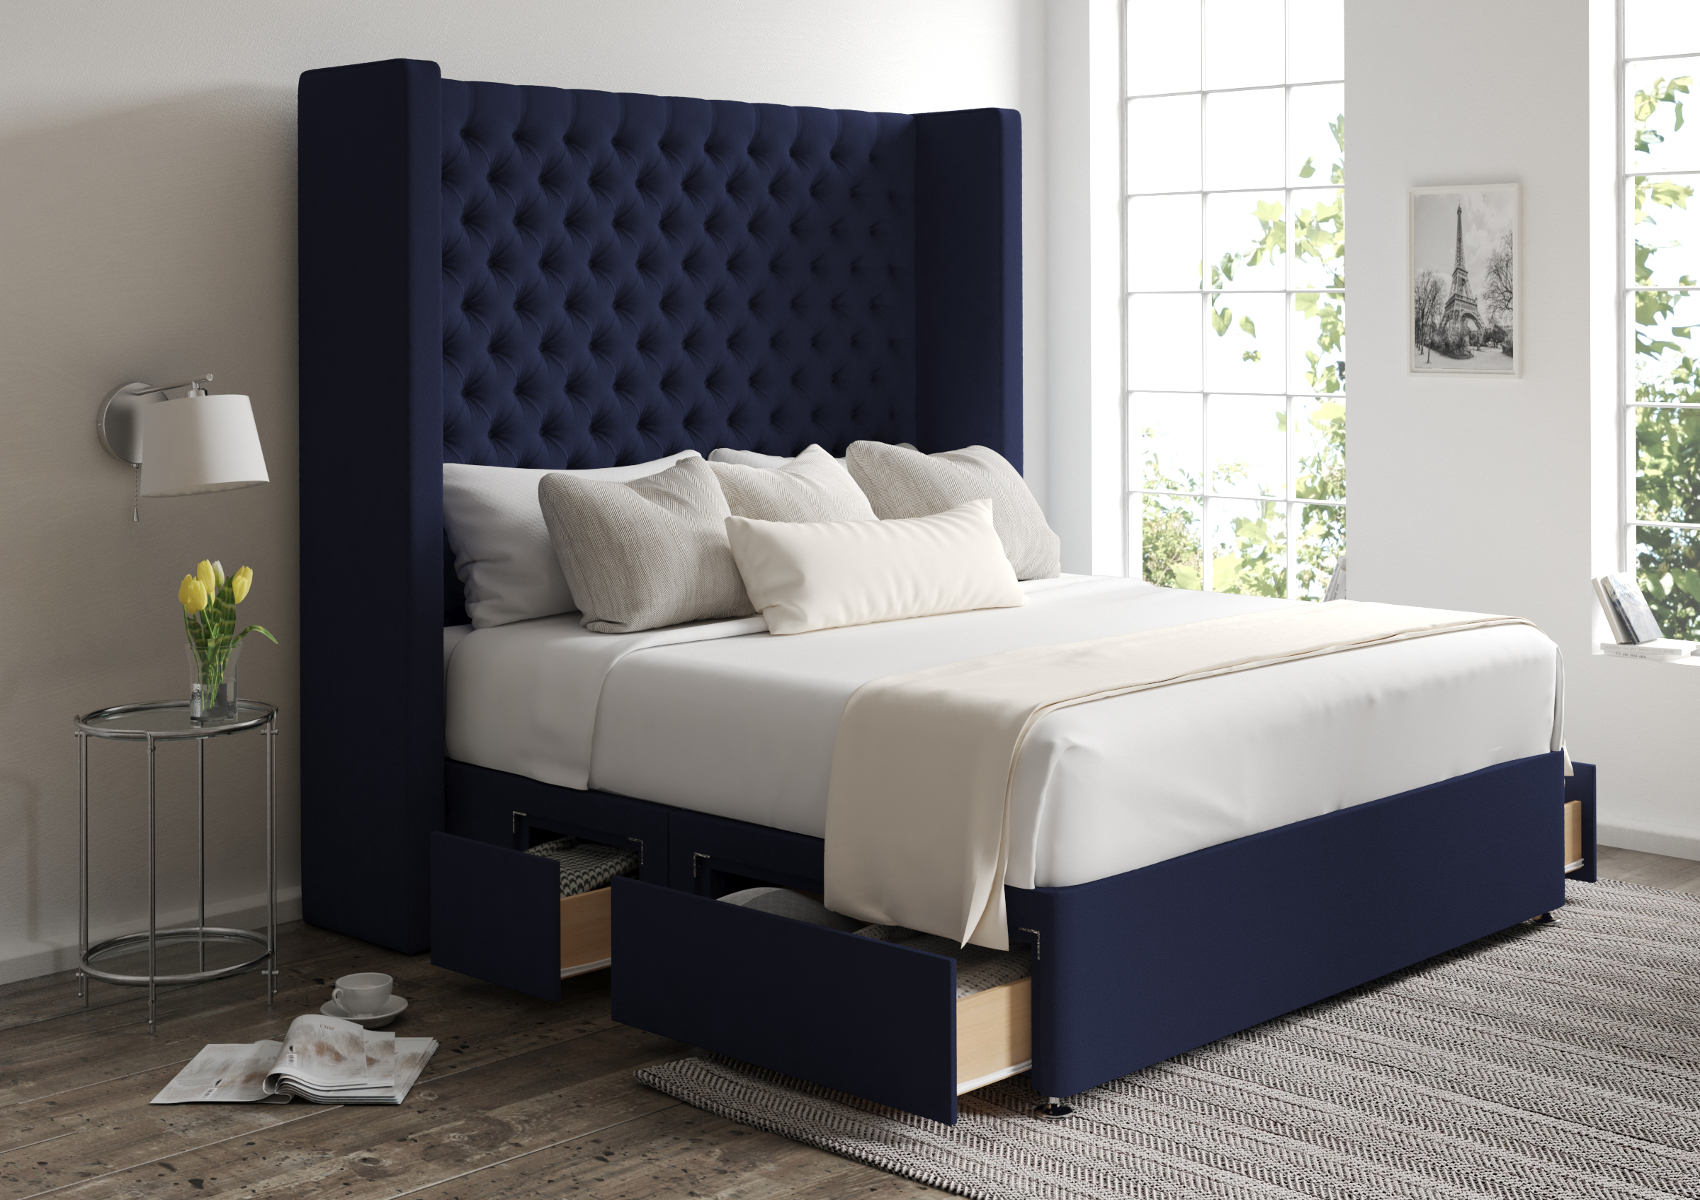 View Emma Hugo Royal Upholstered Double Storage Bed Time4Sleep information